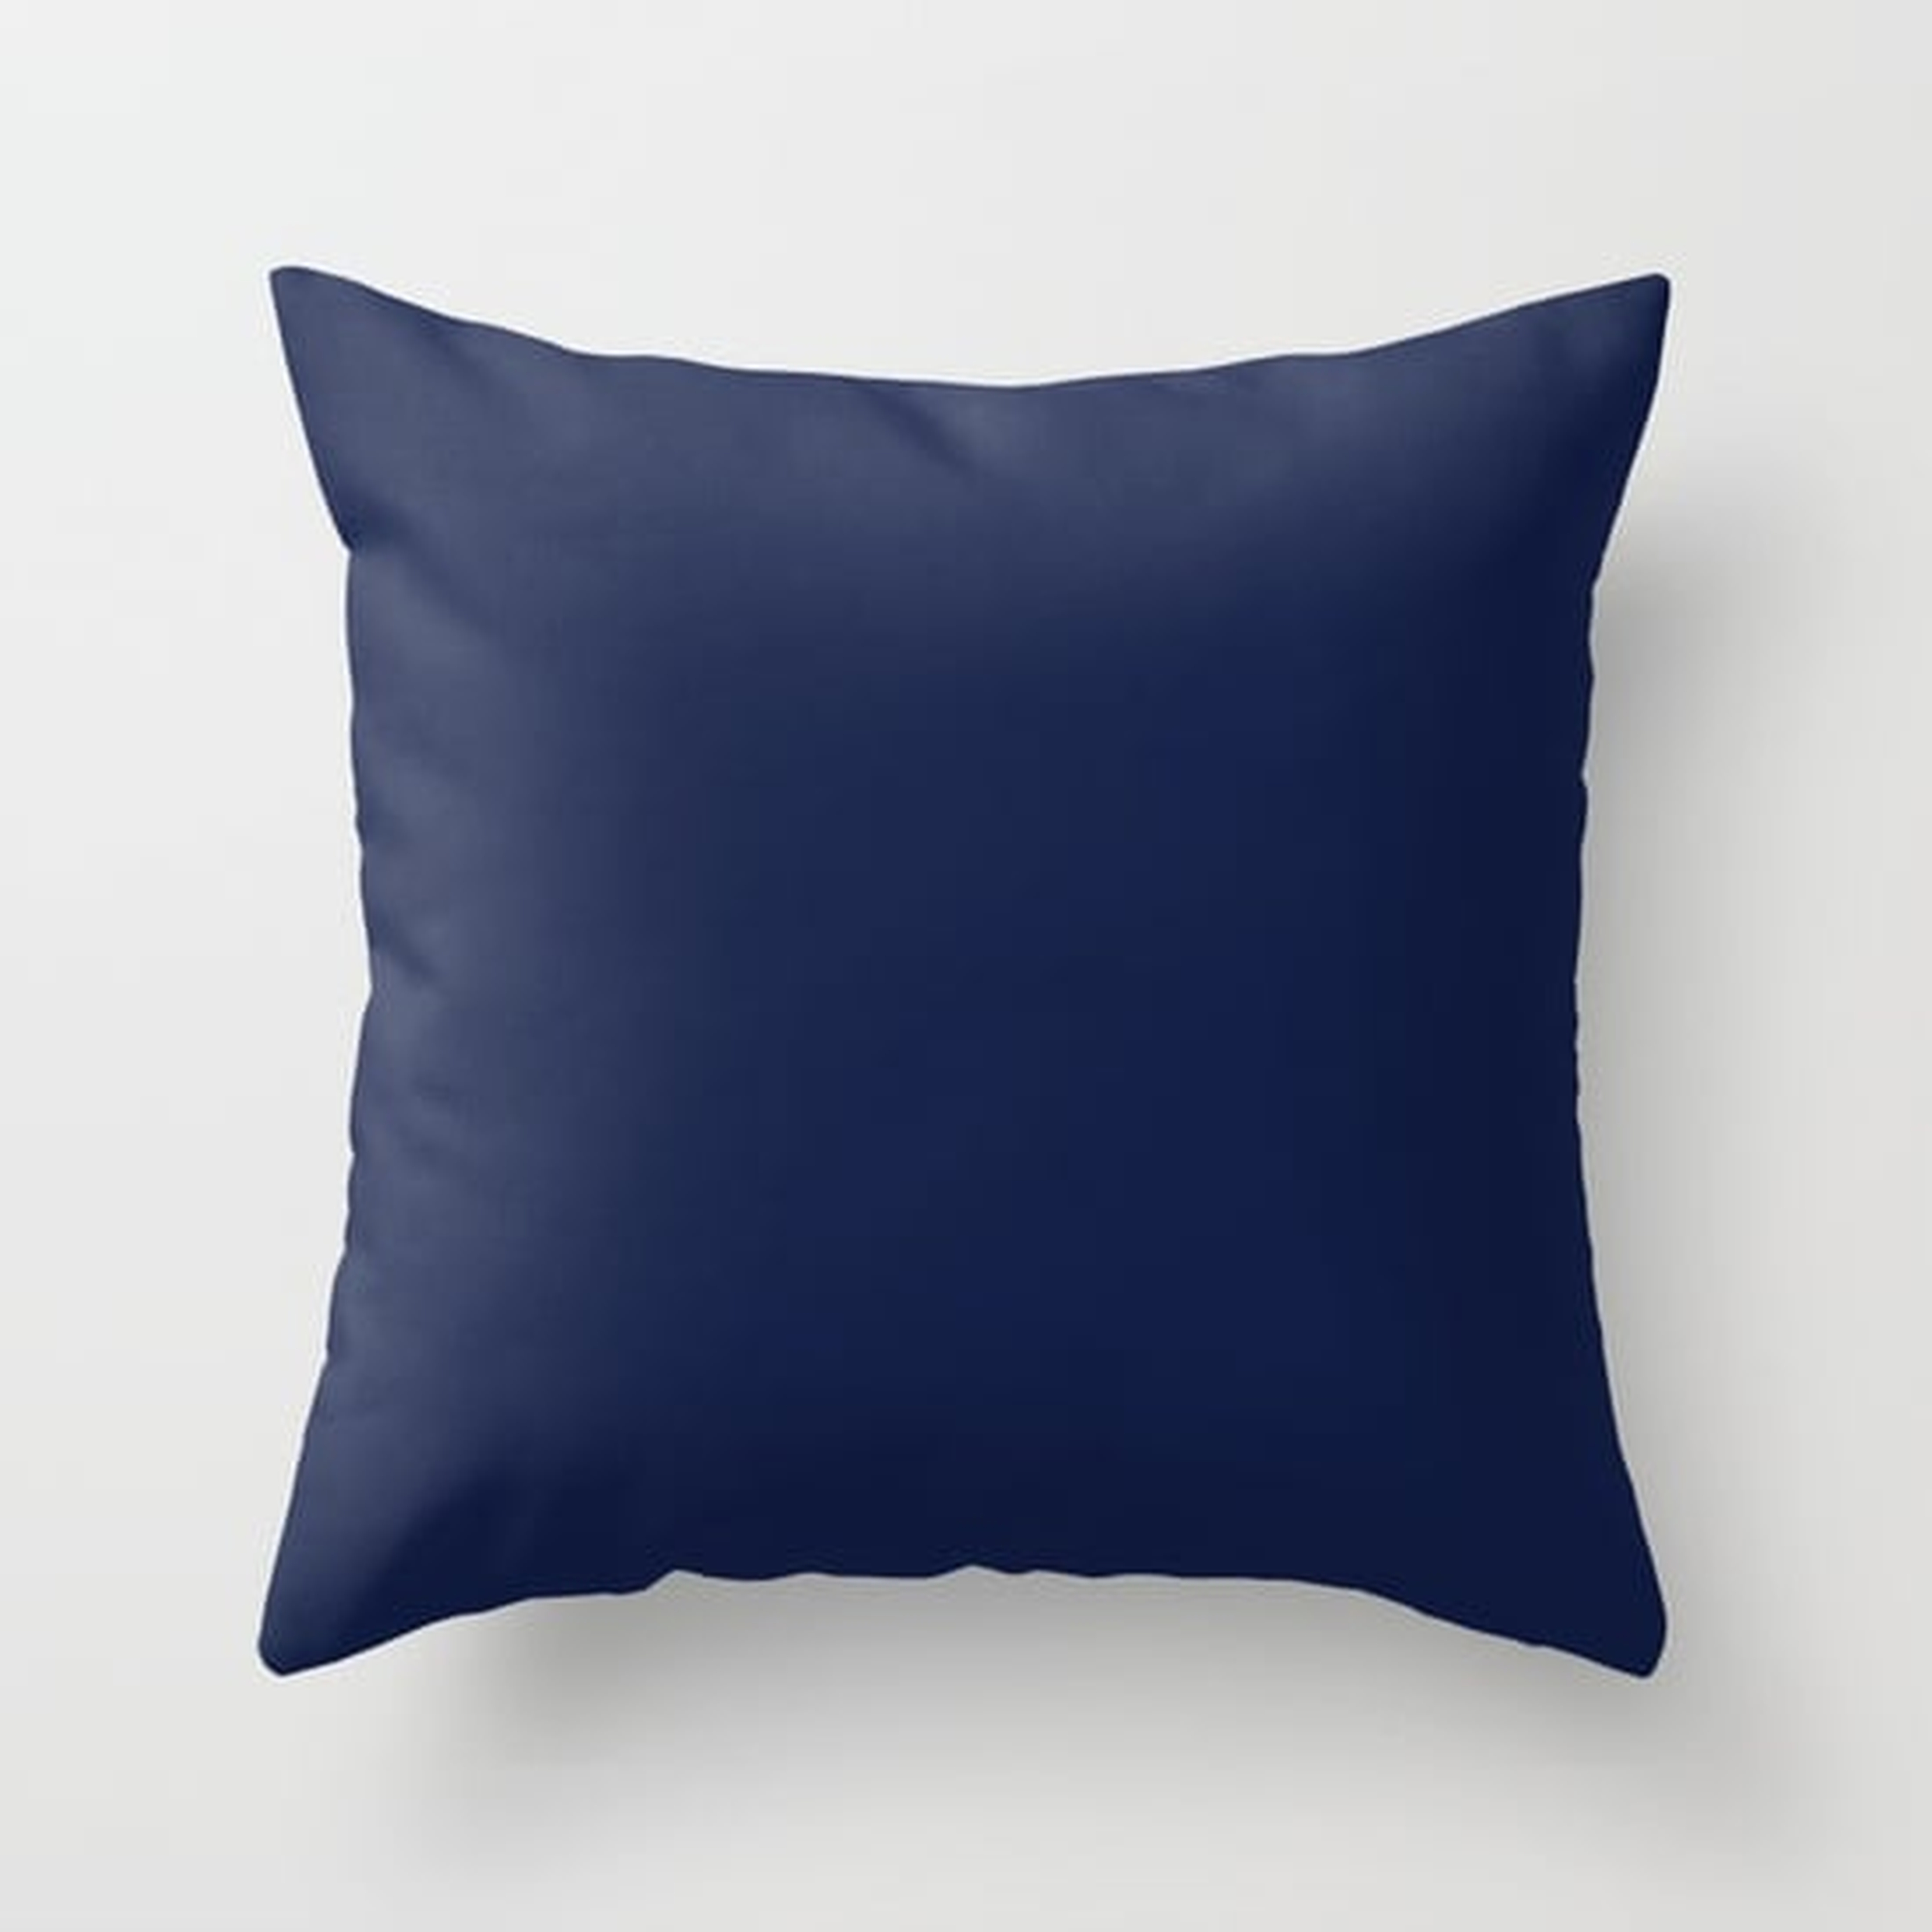 Indigo Navy Blue Throw Pillow - 18" x 18" Cover with Insert - Society6